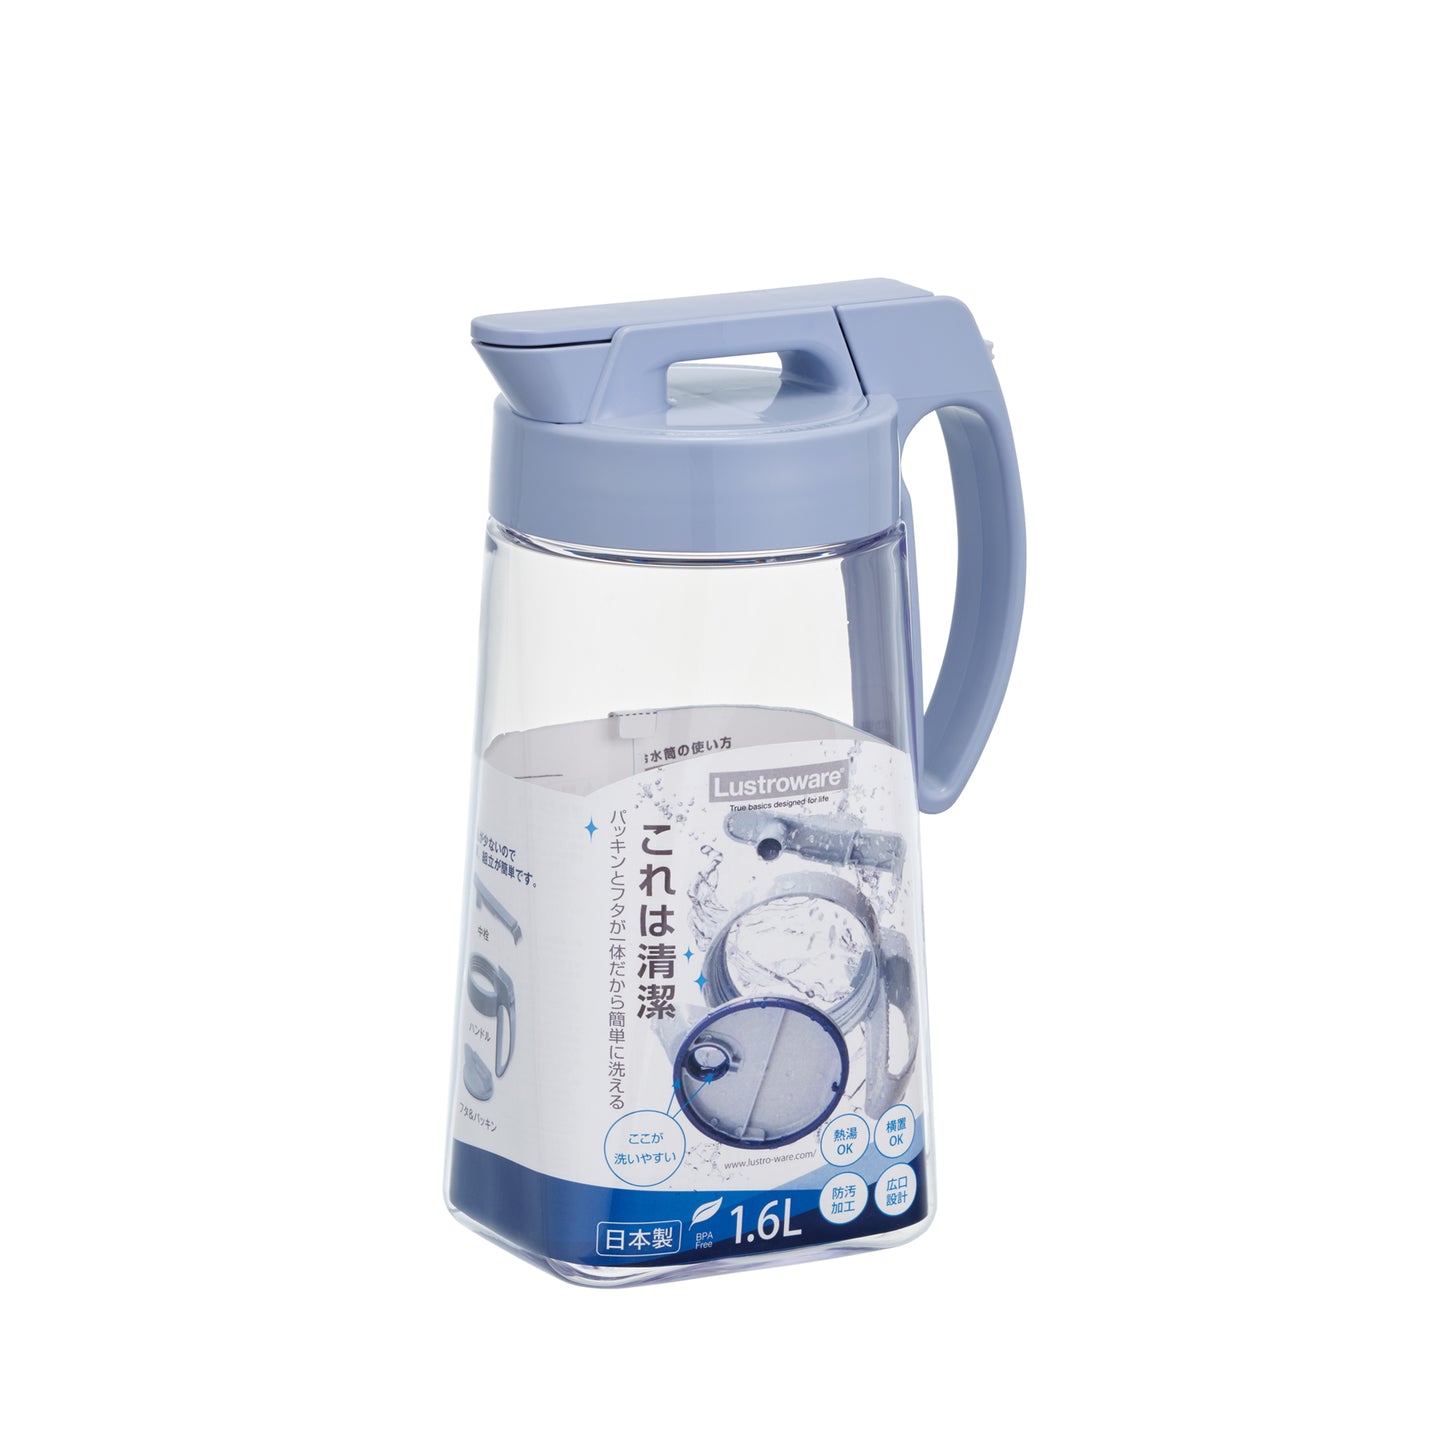 Lustroware Water Pitcher 1.6L Blue K-1275-NW